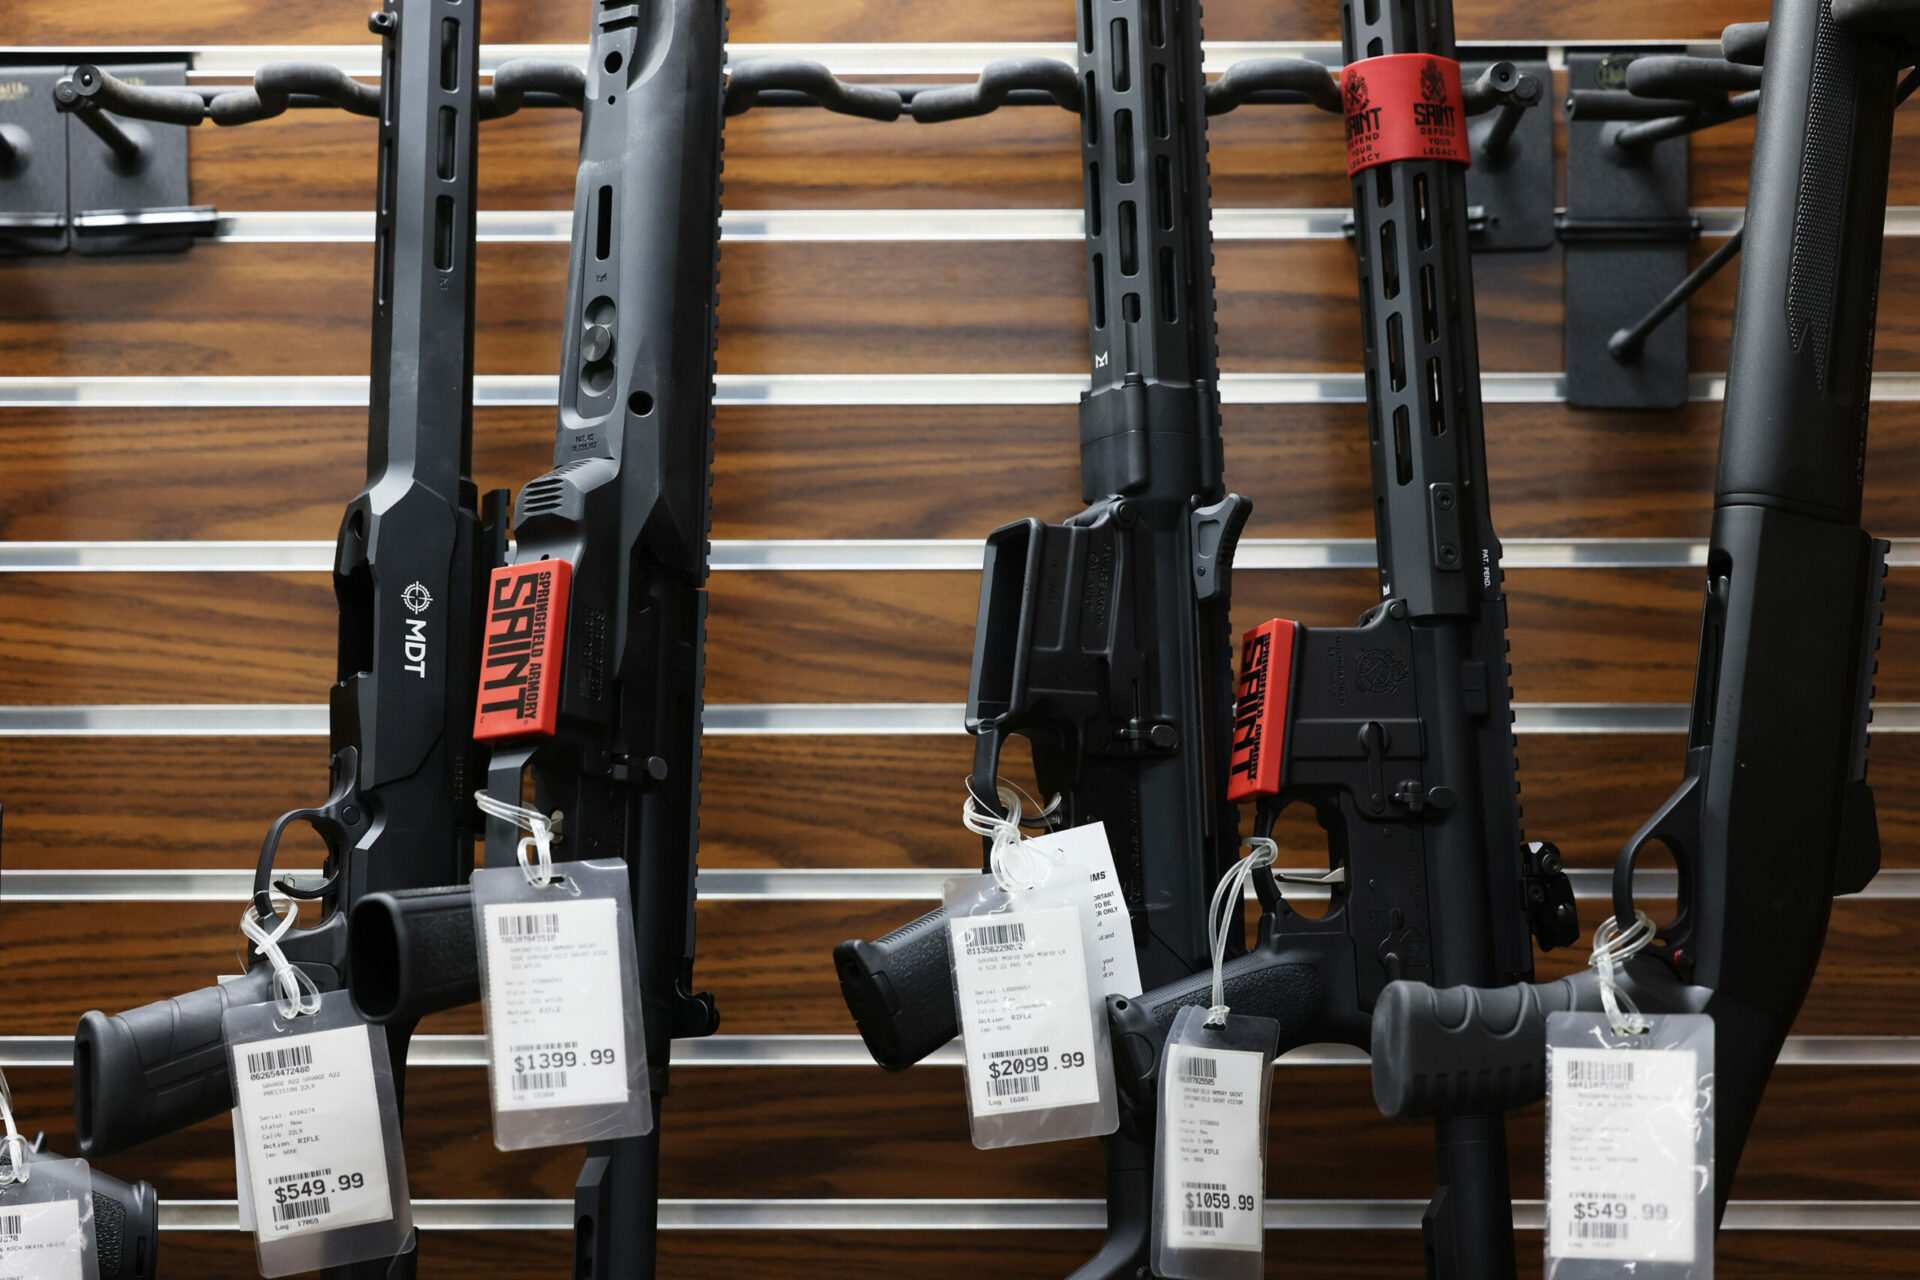 With less than 6 weeks before deadline, 3,400 gun owners have registered guns covered by Illinois ban